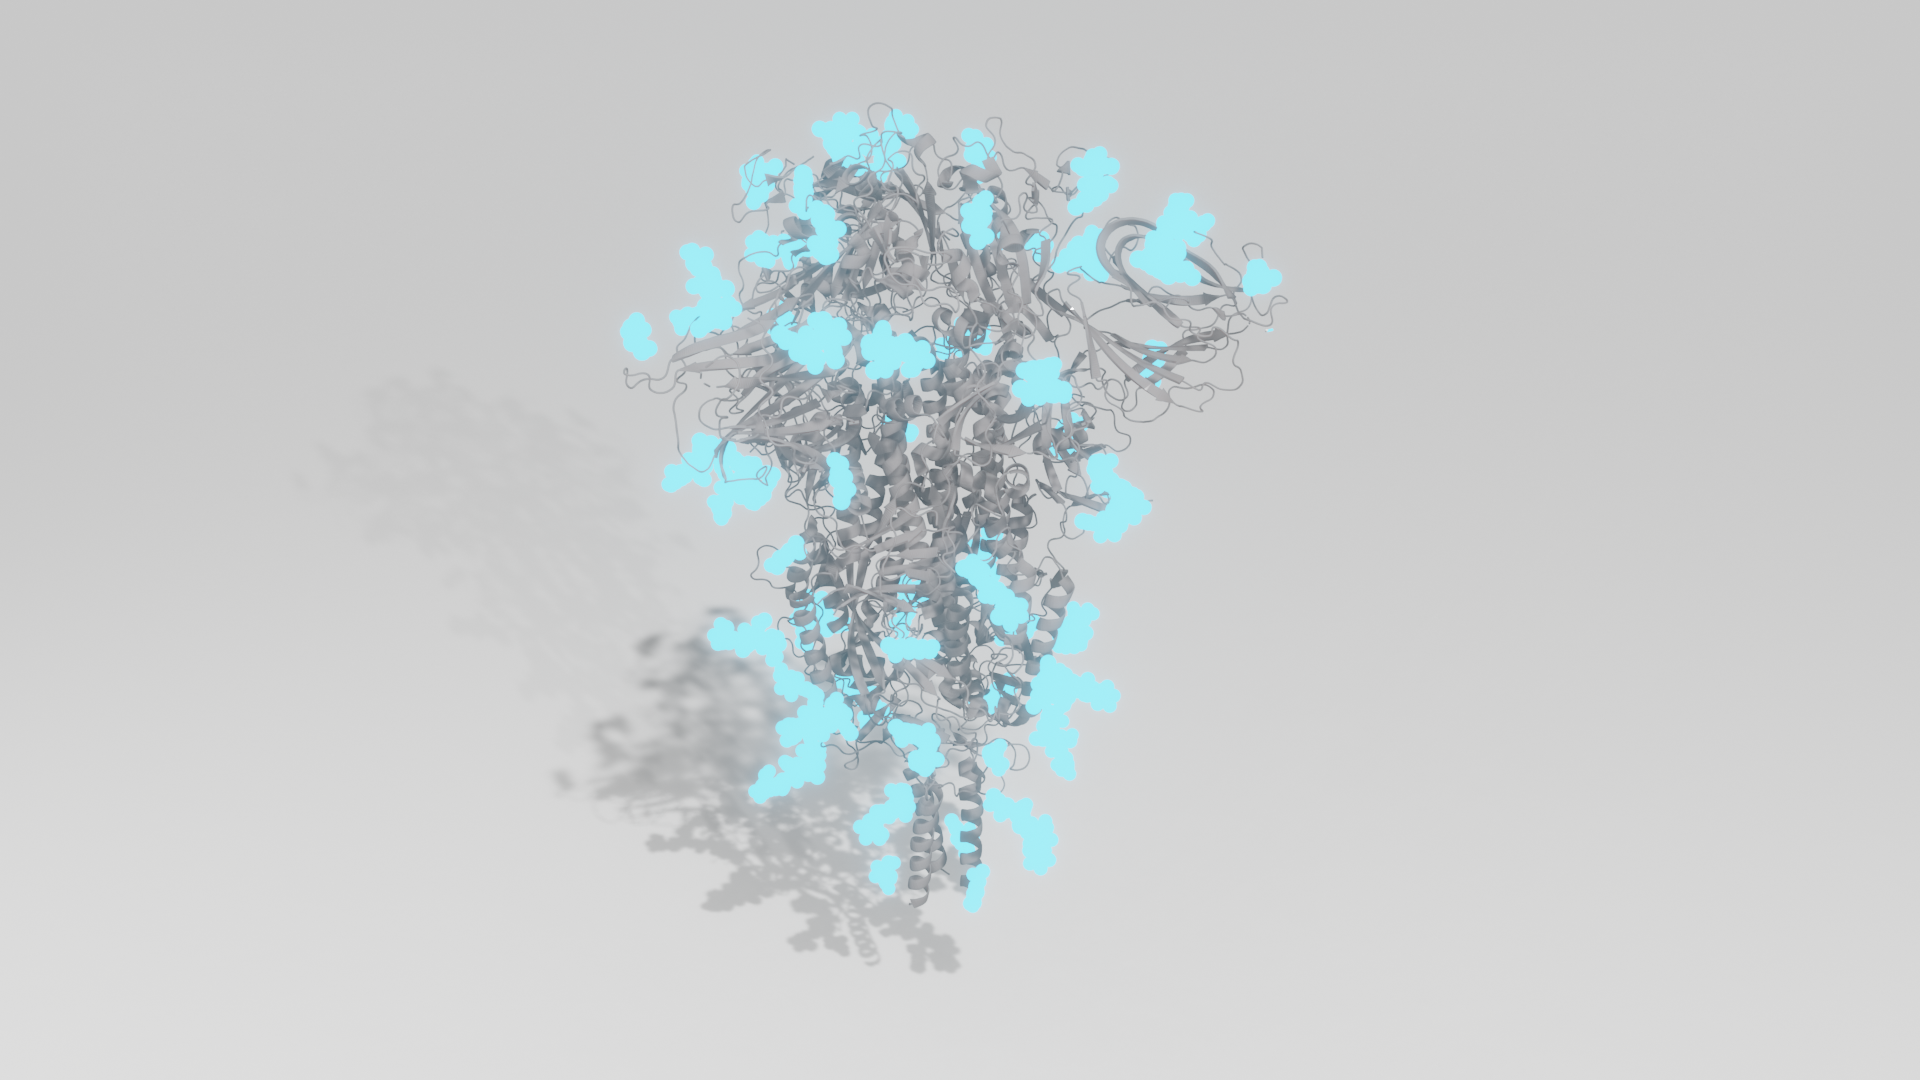 3D rendered model of sars-cov-2 spike protein with glycans